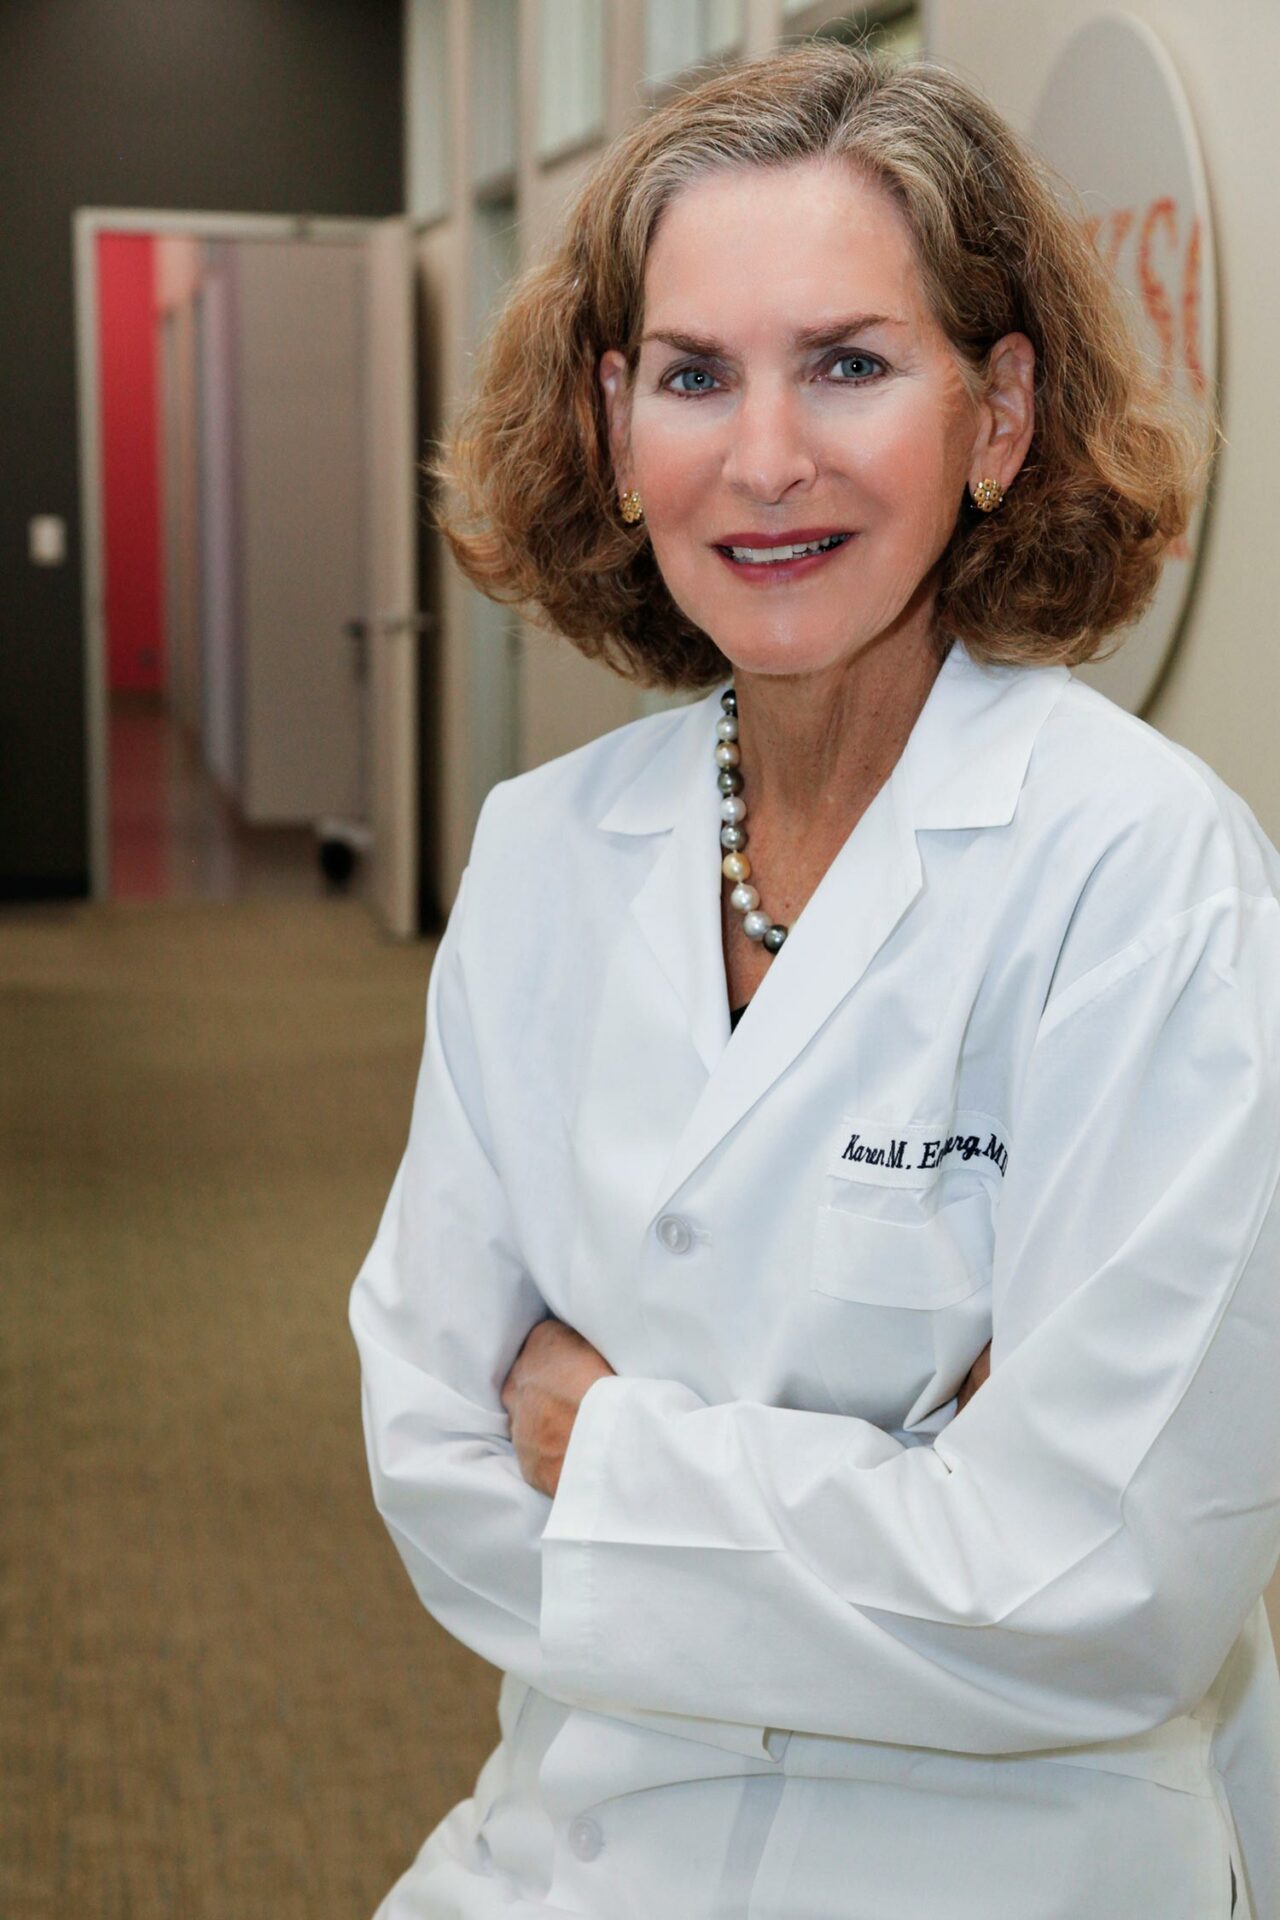 A woman in a lab coat posing for a photo.